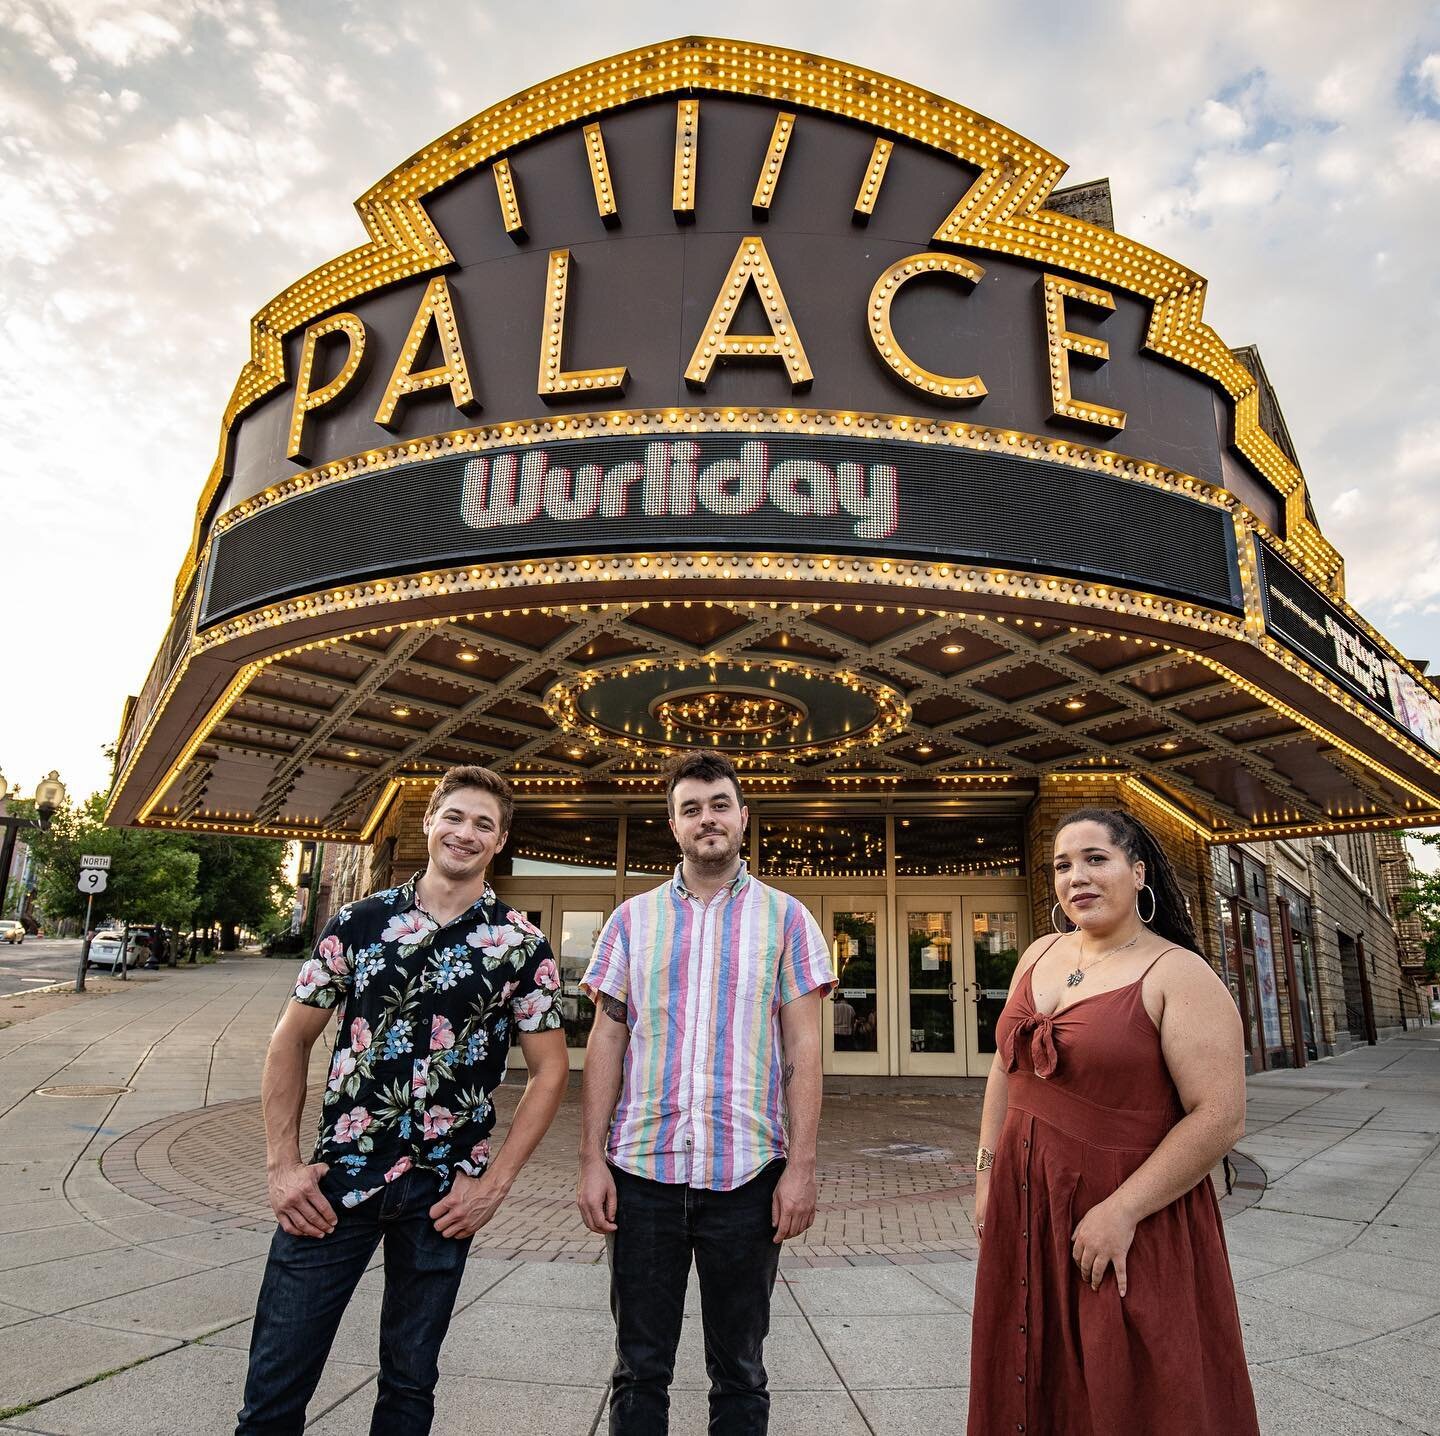 Tonight! We&rsquo;re excited to kick off the @palacealbany Summer Sessions, tune in at 7:00 EST on their YouTube channel. We had so much fun stripping down our songs and performing as a trio! Special thanks to @mirth_films @albanynyevents @palacealba